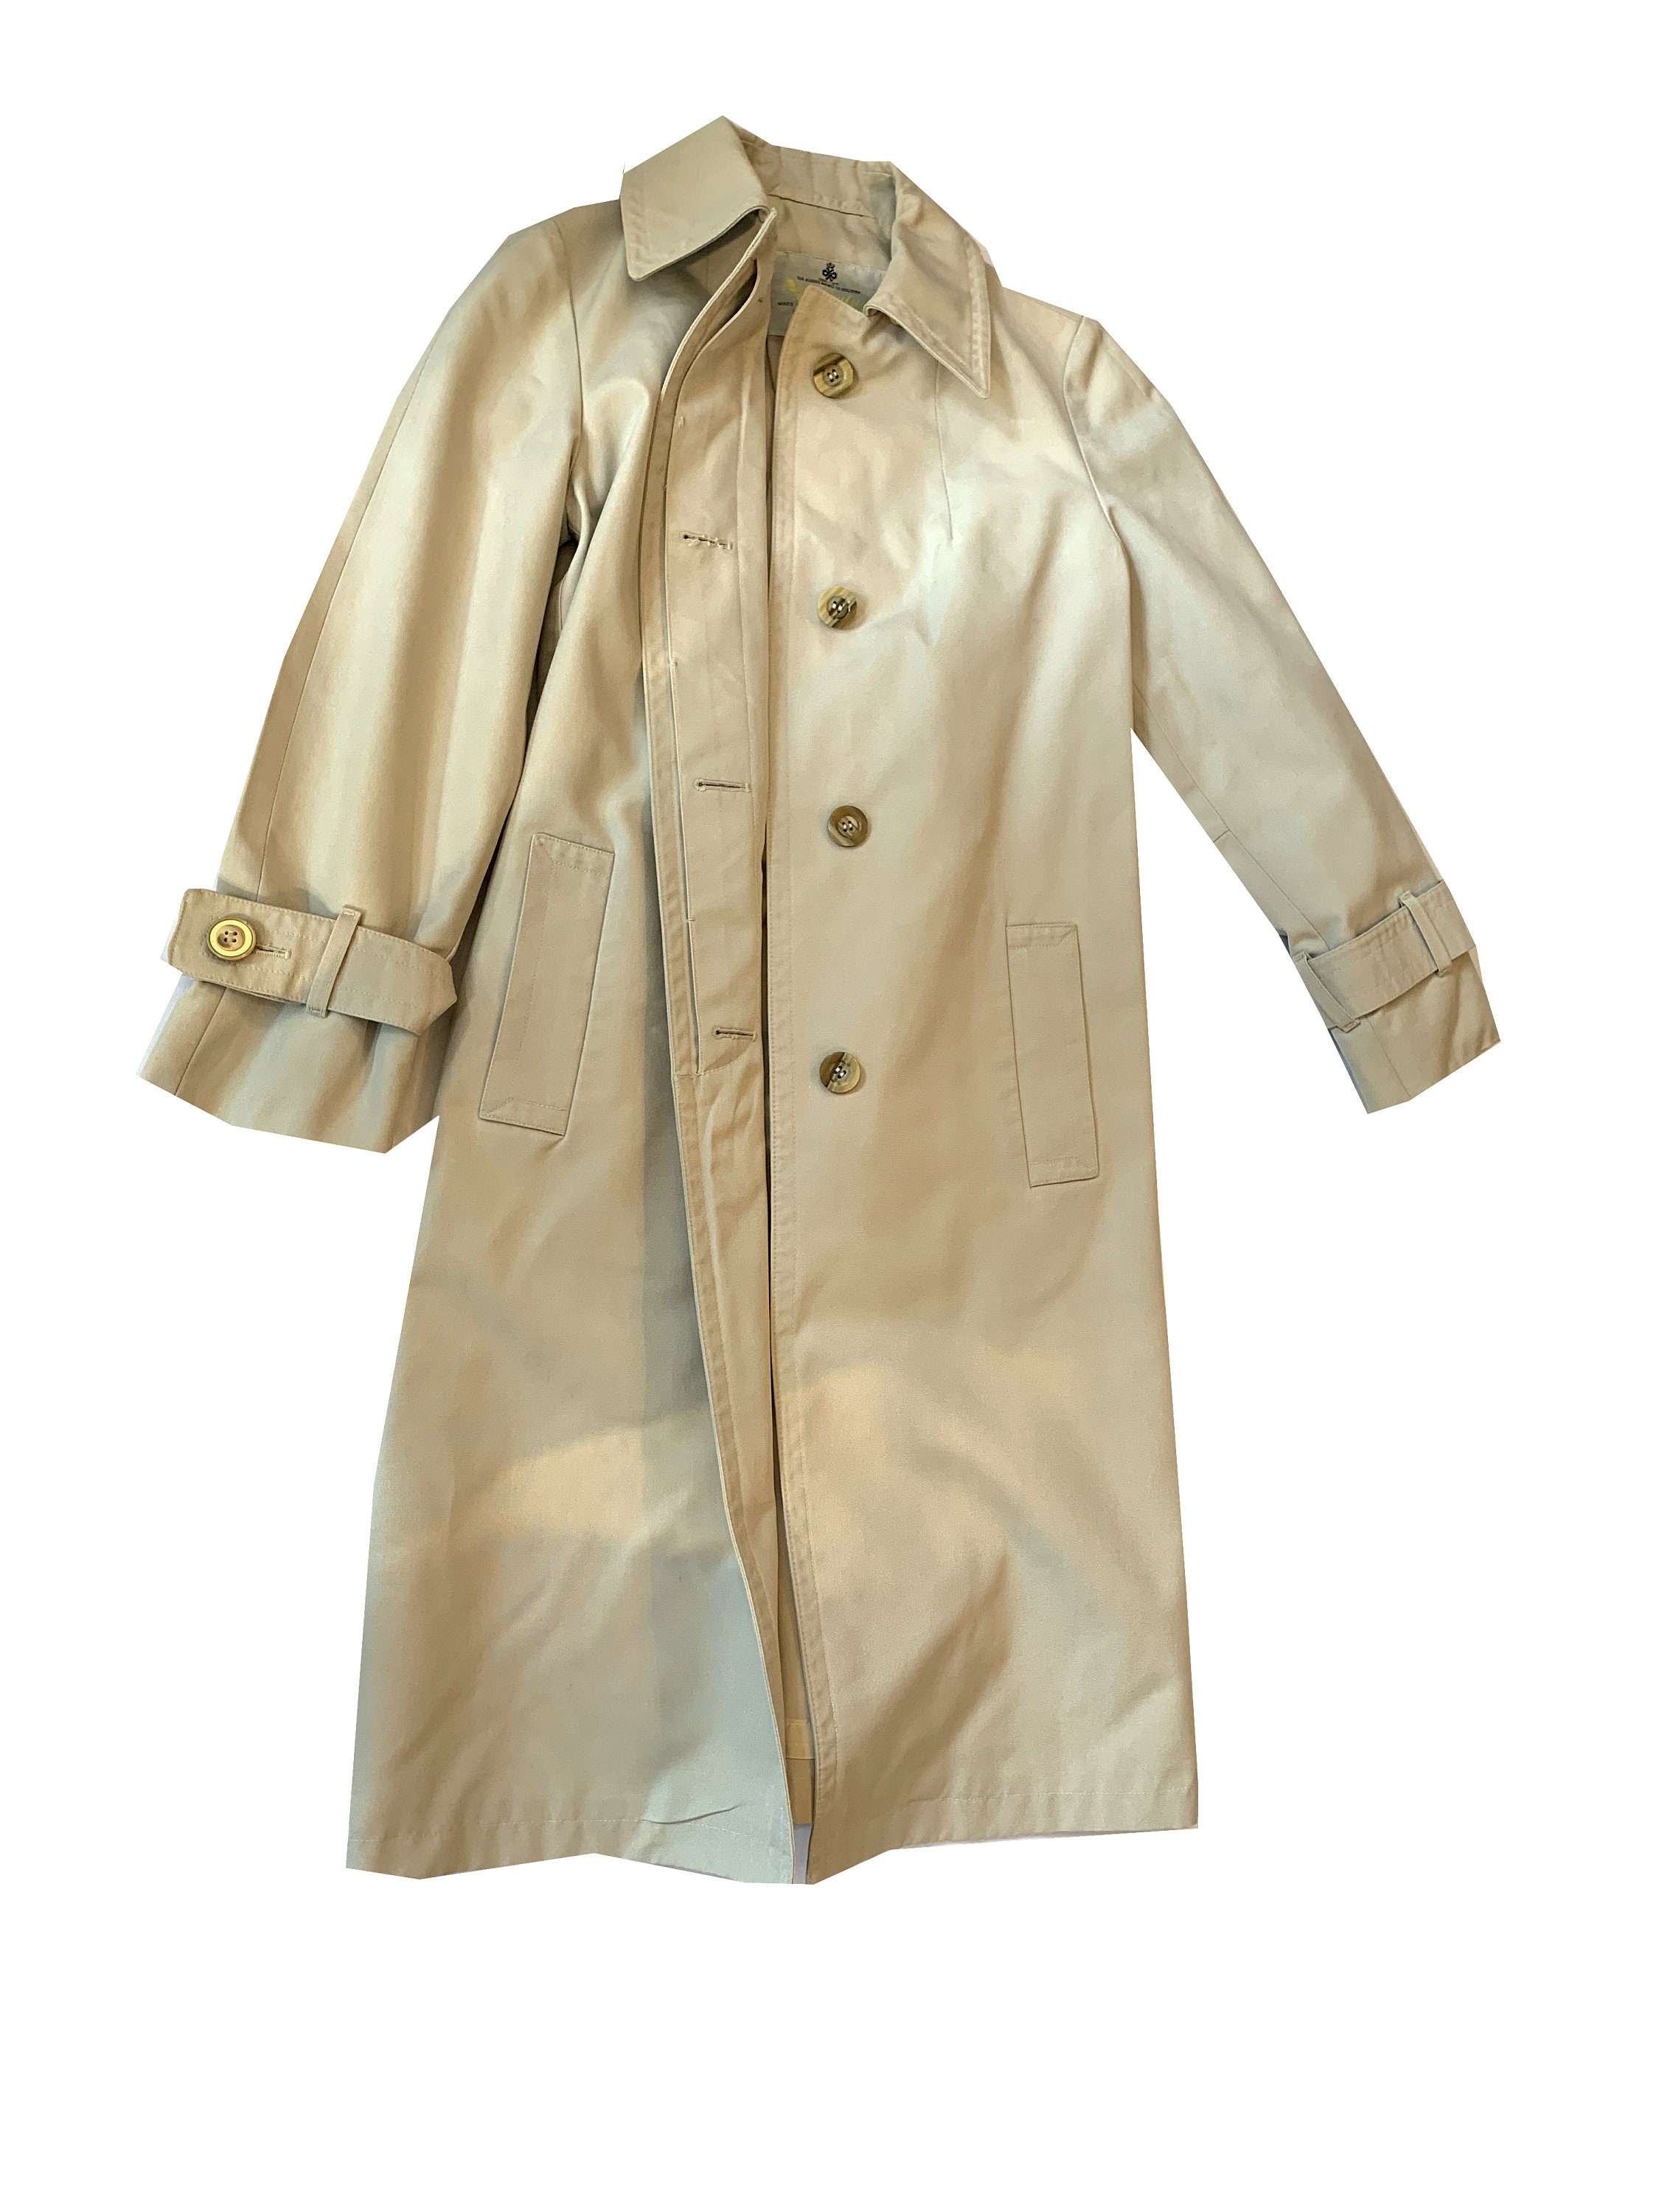 LOUIS VUITTON Cotton Trench Coat 38 Brown Authentic Women Used from Japan